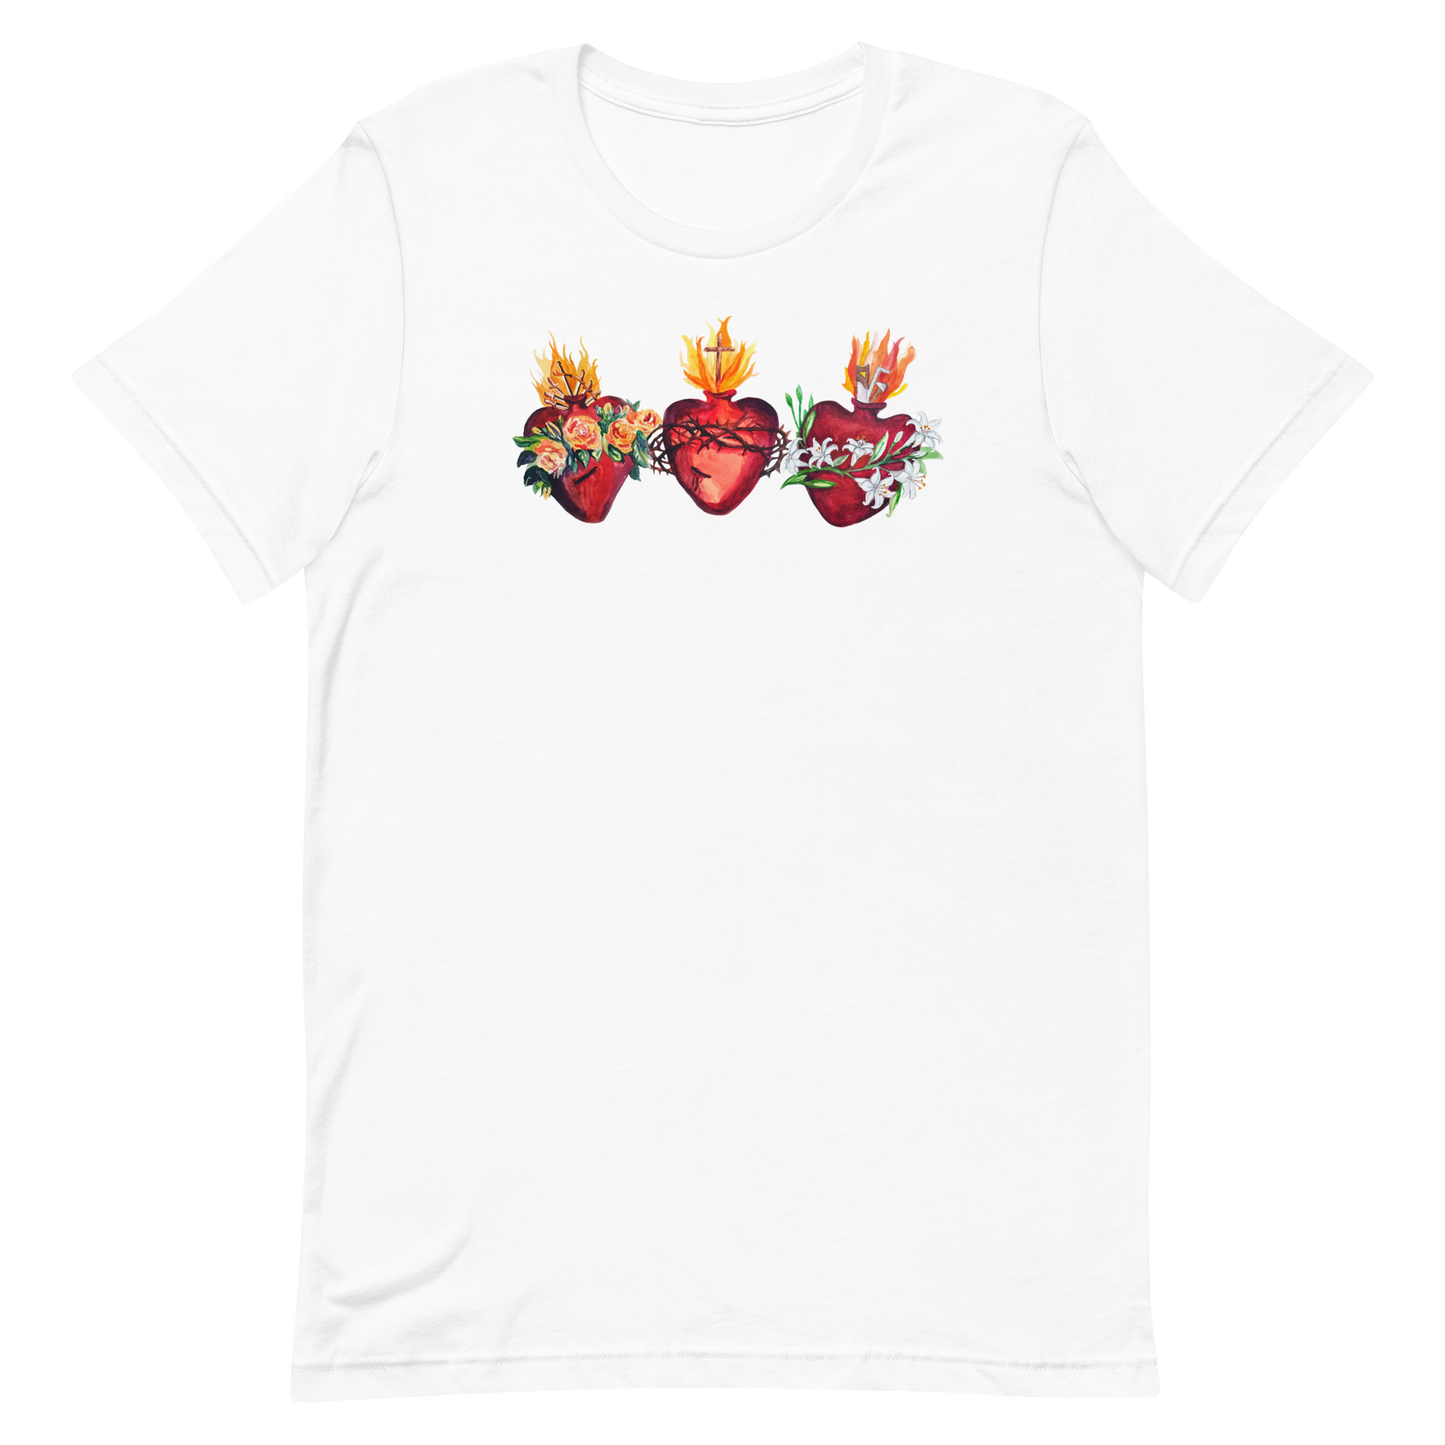 Hearts of the Holy Family T-Shirt